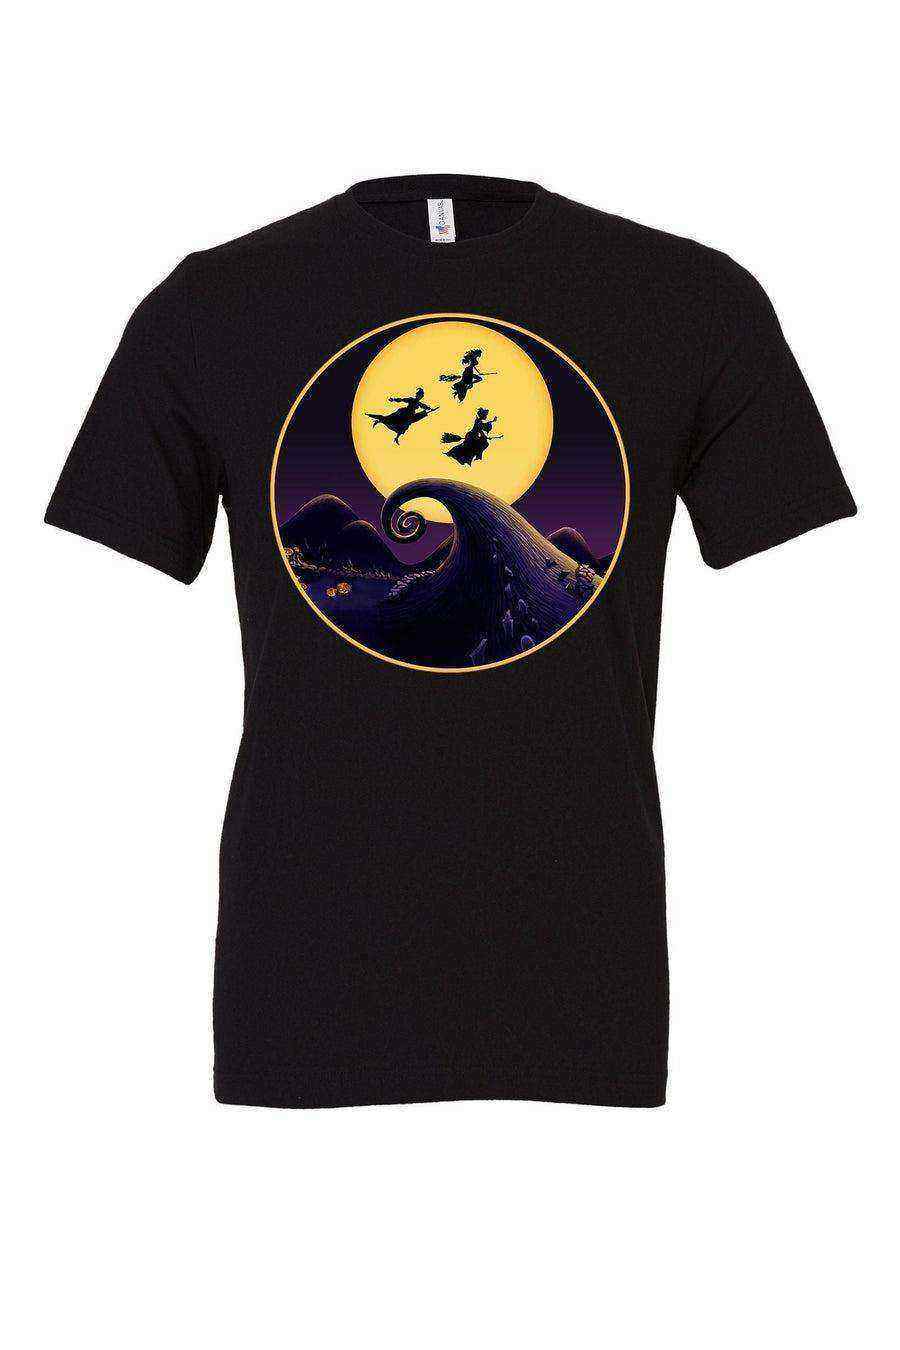 Youth | Sanderson Sisters visit Halloween Town Shirt | Hocus Pocus Nightmare Before Christmas Shirt - Dylan's Tees